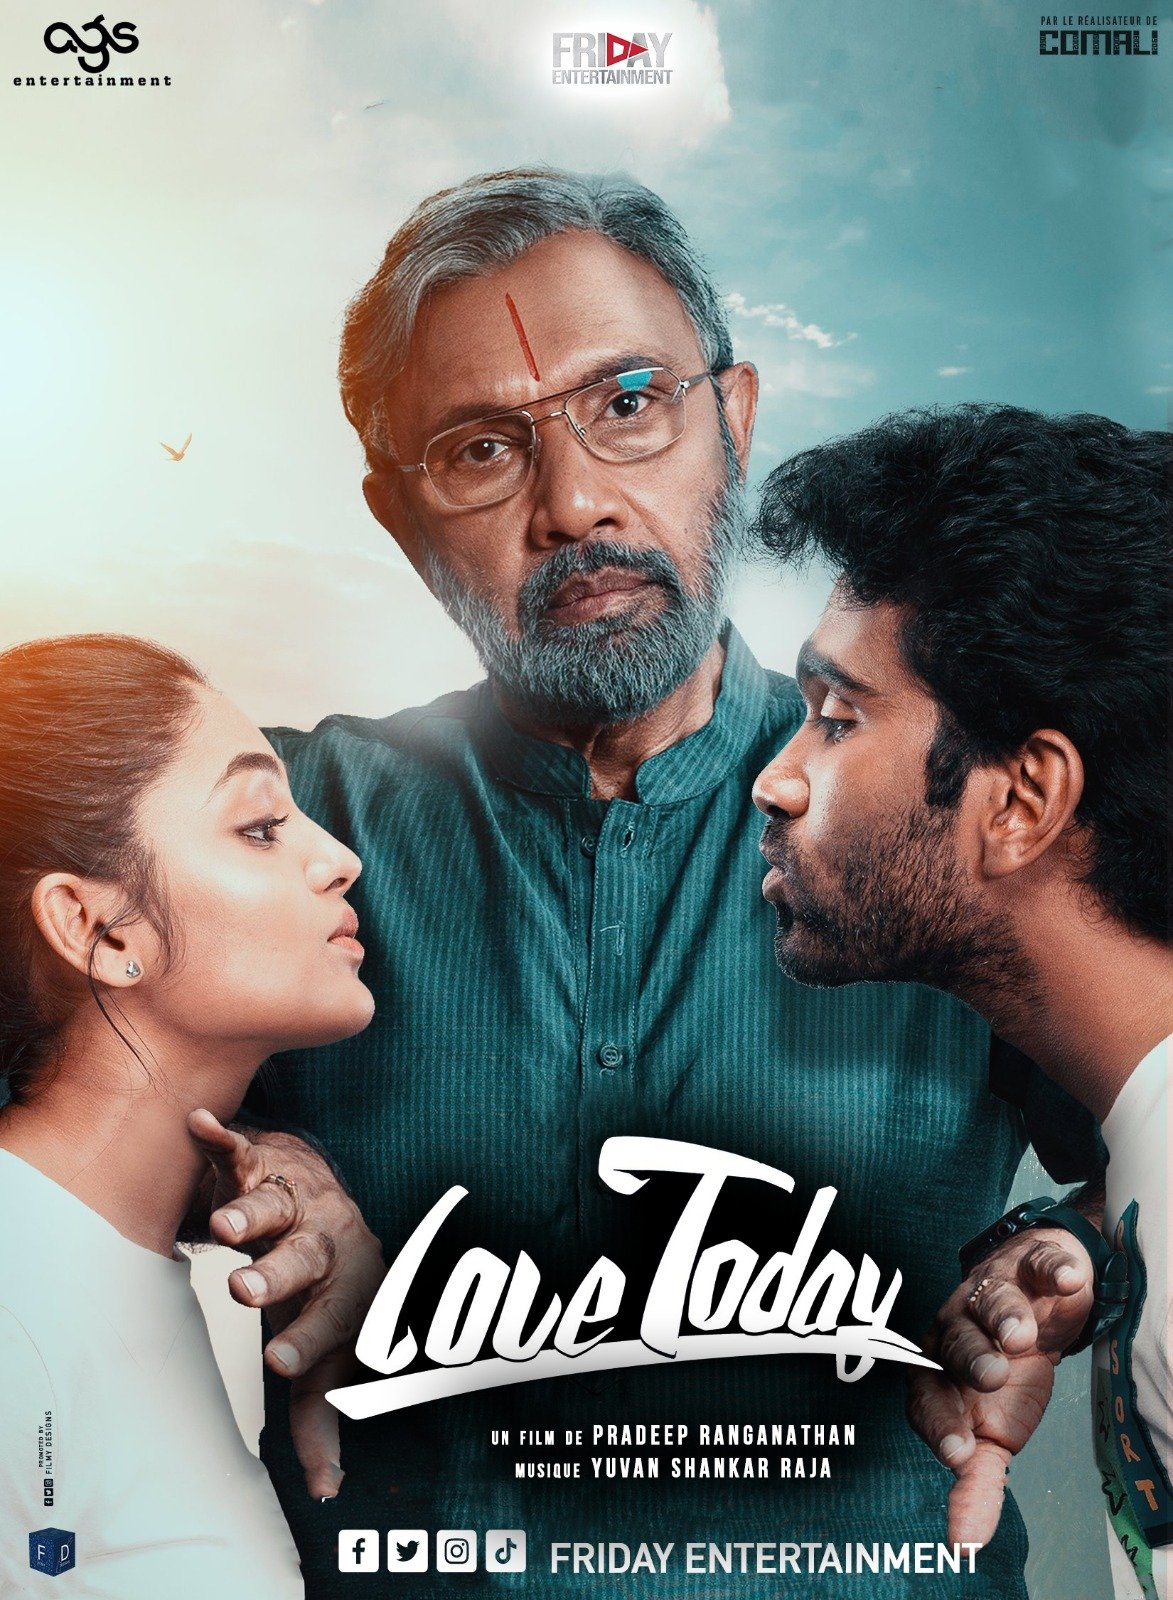 love today recent movie review